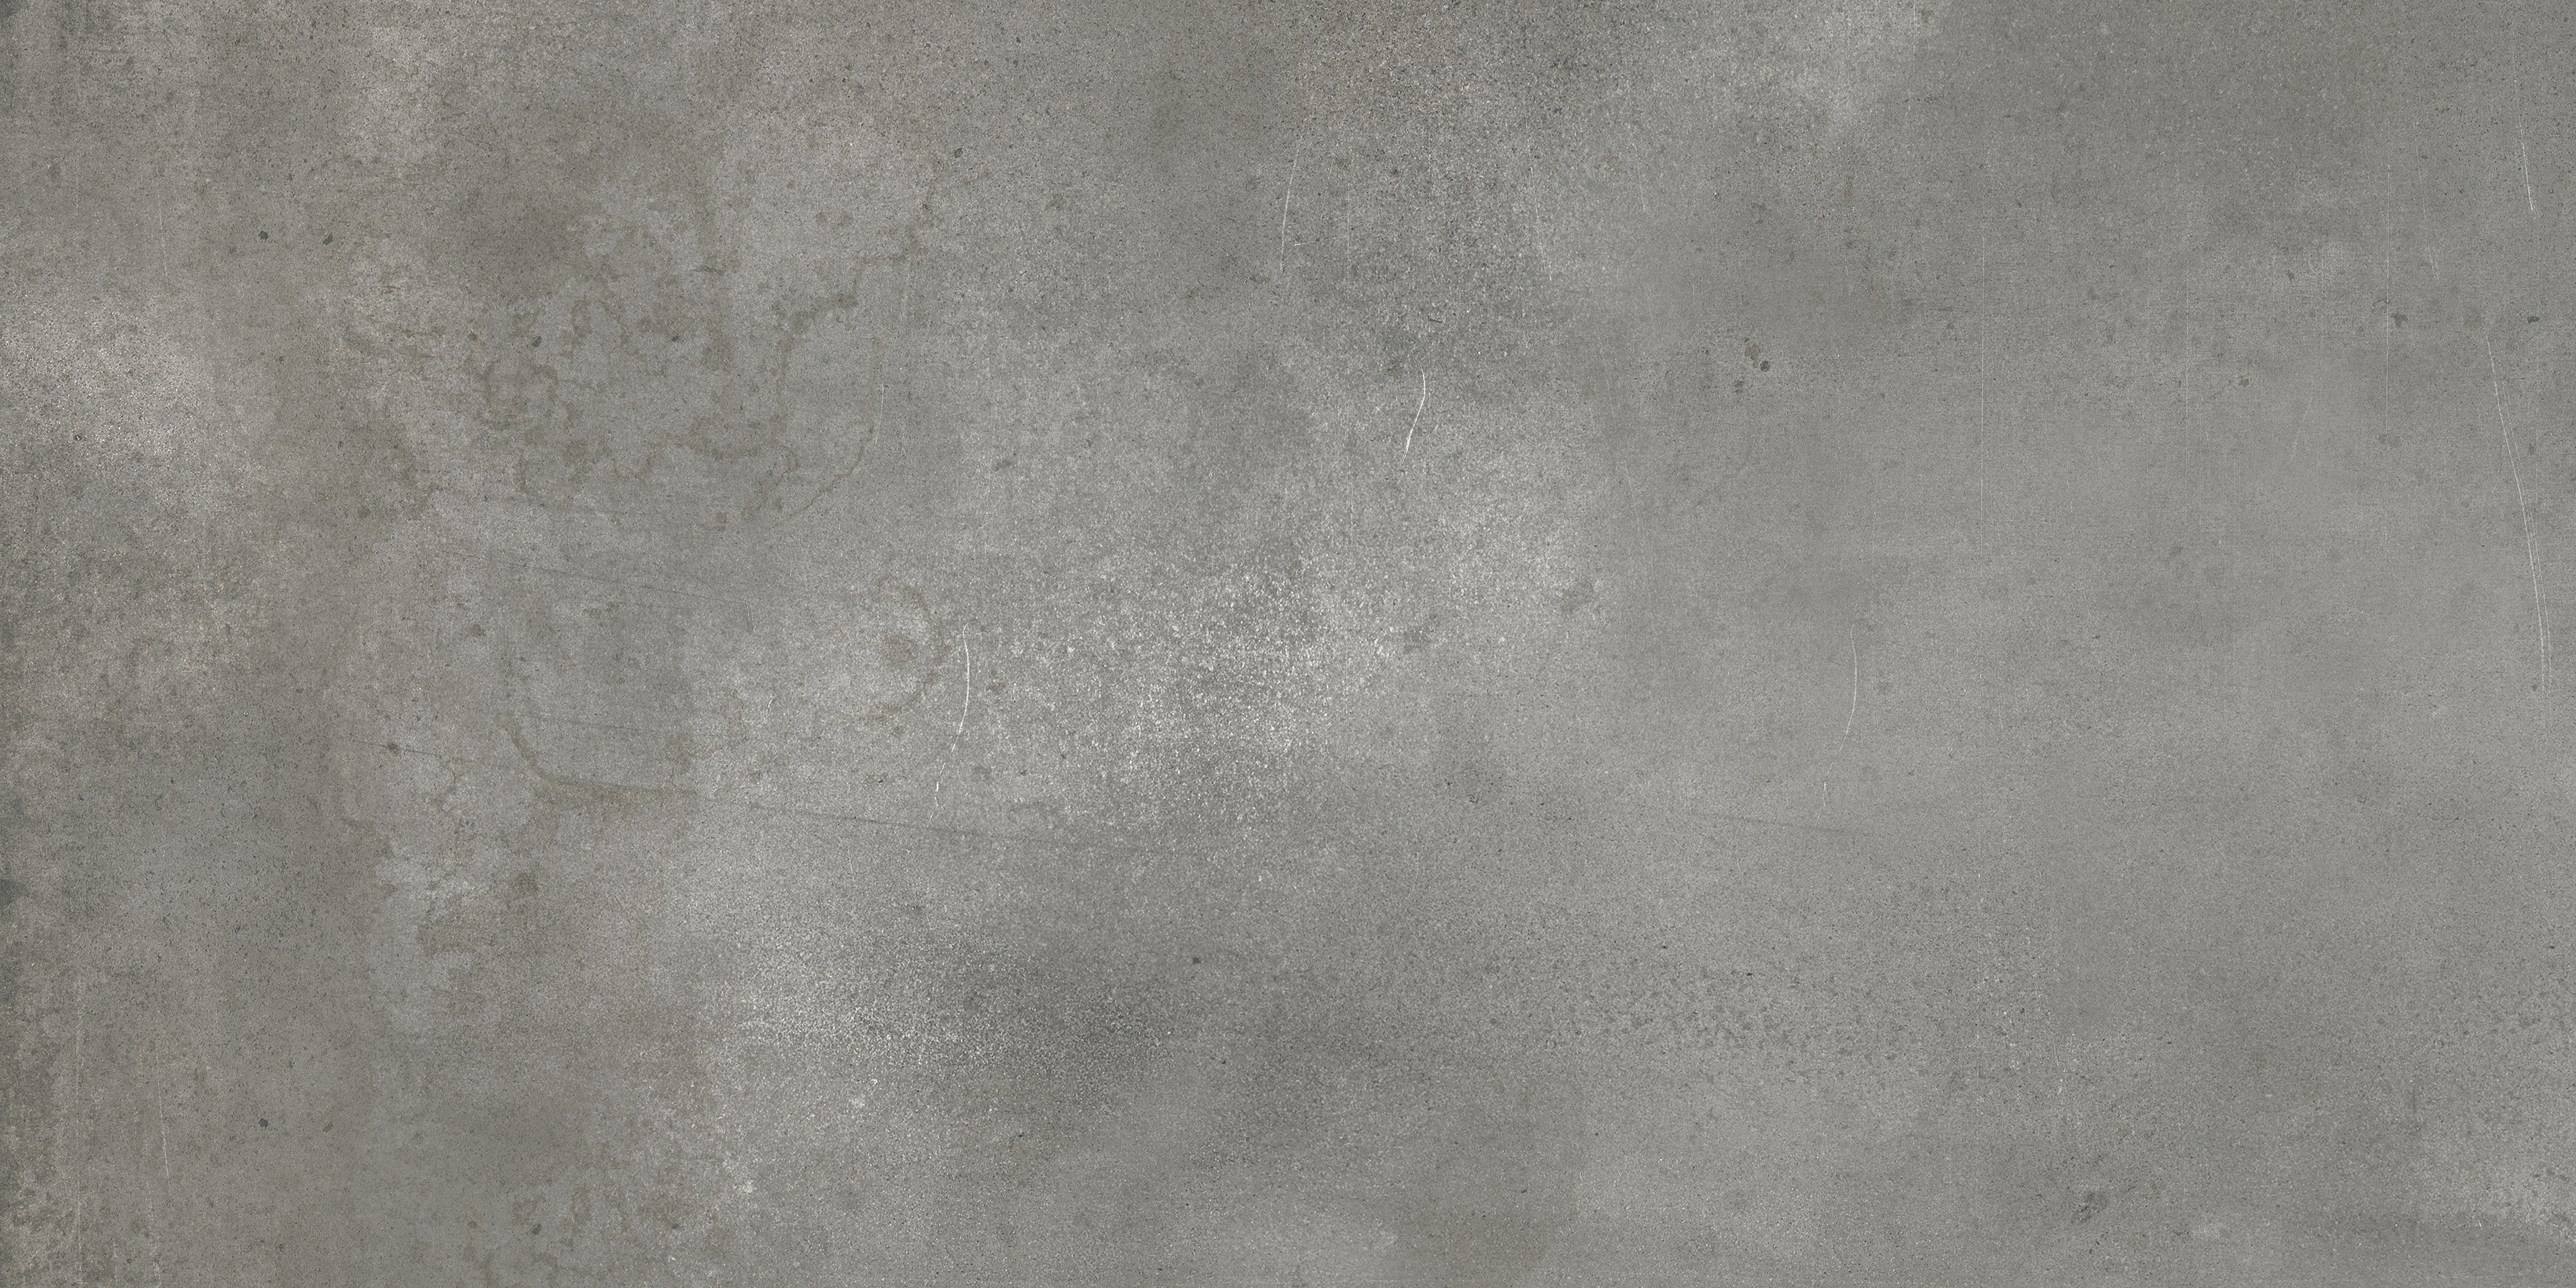 titanium pattern color body porcelain field tile from ceraforge anatolia collection distributed by surface group international matte finish rectified edge 12x24 rectangle shape